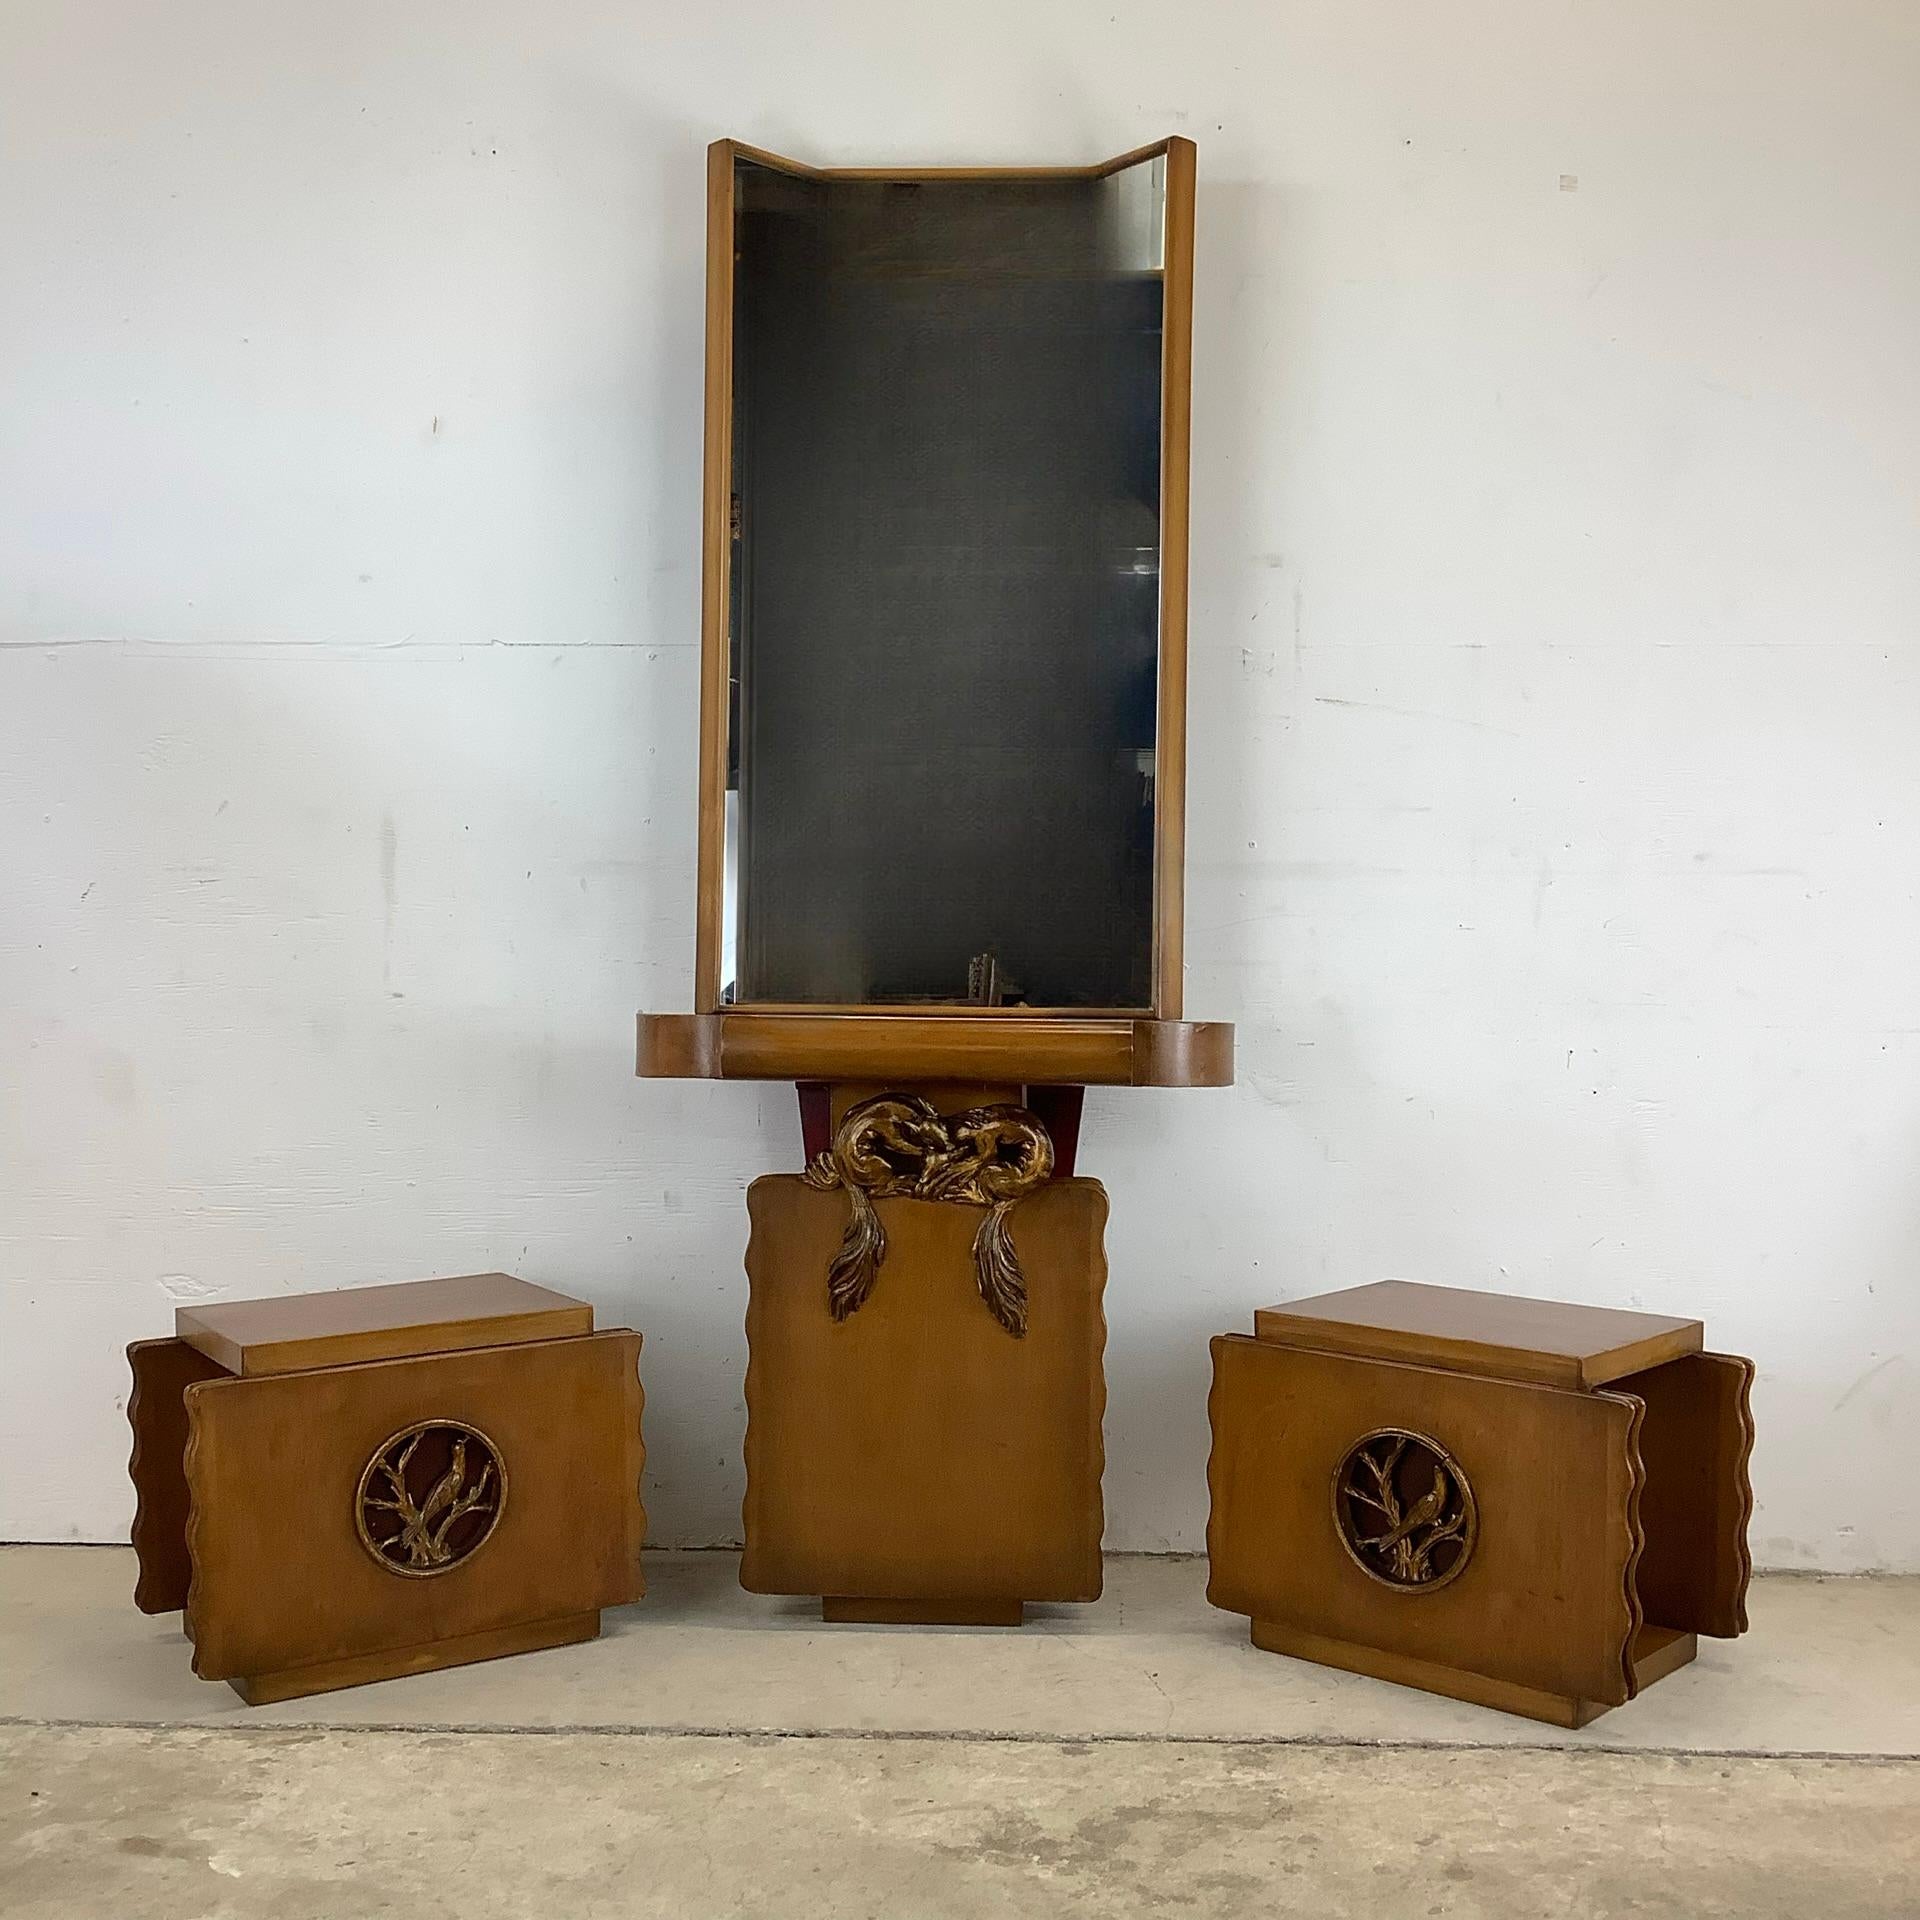 Looking for a statement piece that's both stylish and functional? Look no further than this Eugenio Montuori attributed console table or dressing table with mirror and pair of side tables (or stools)! This stunning set is the perfect way to add some